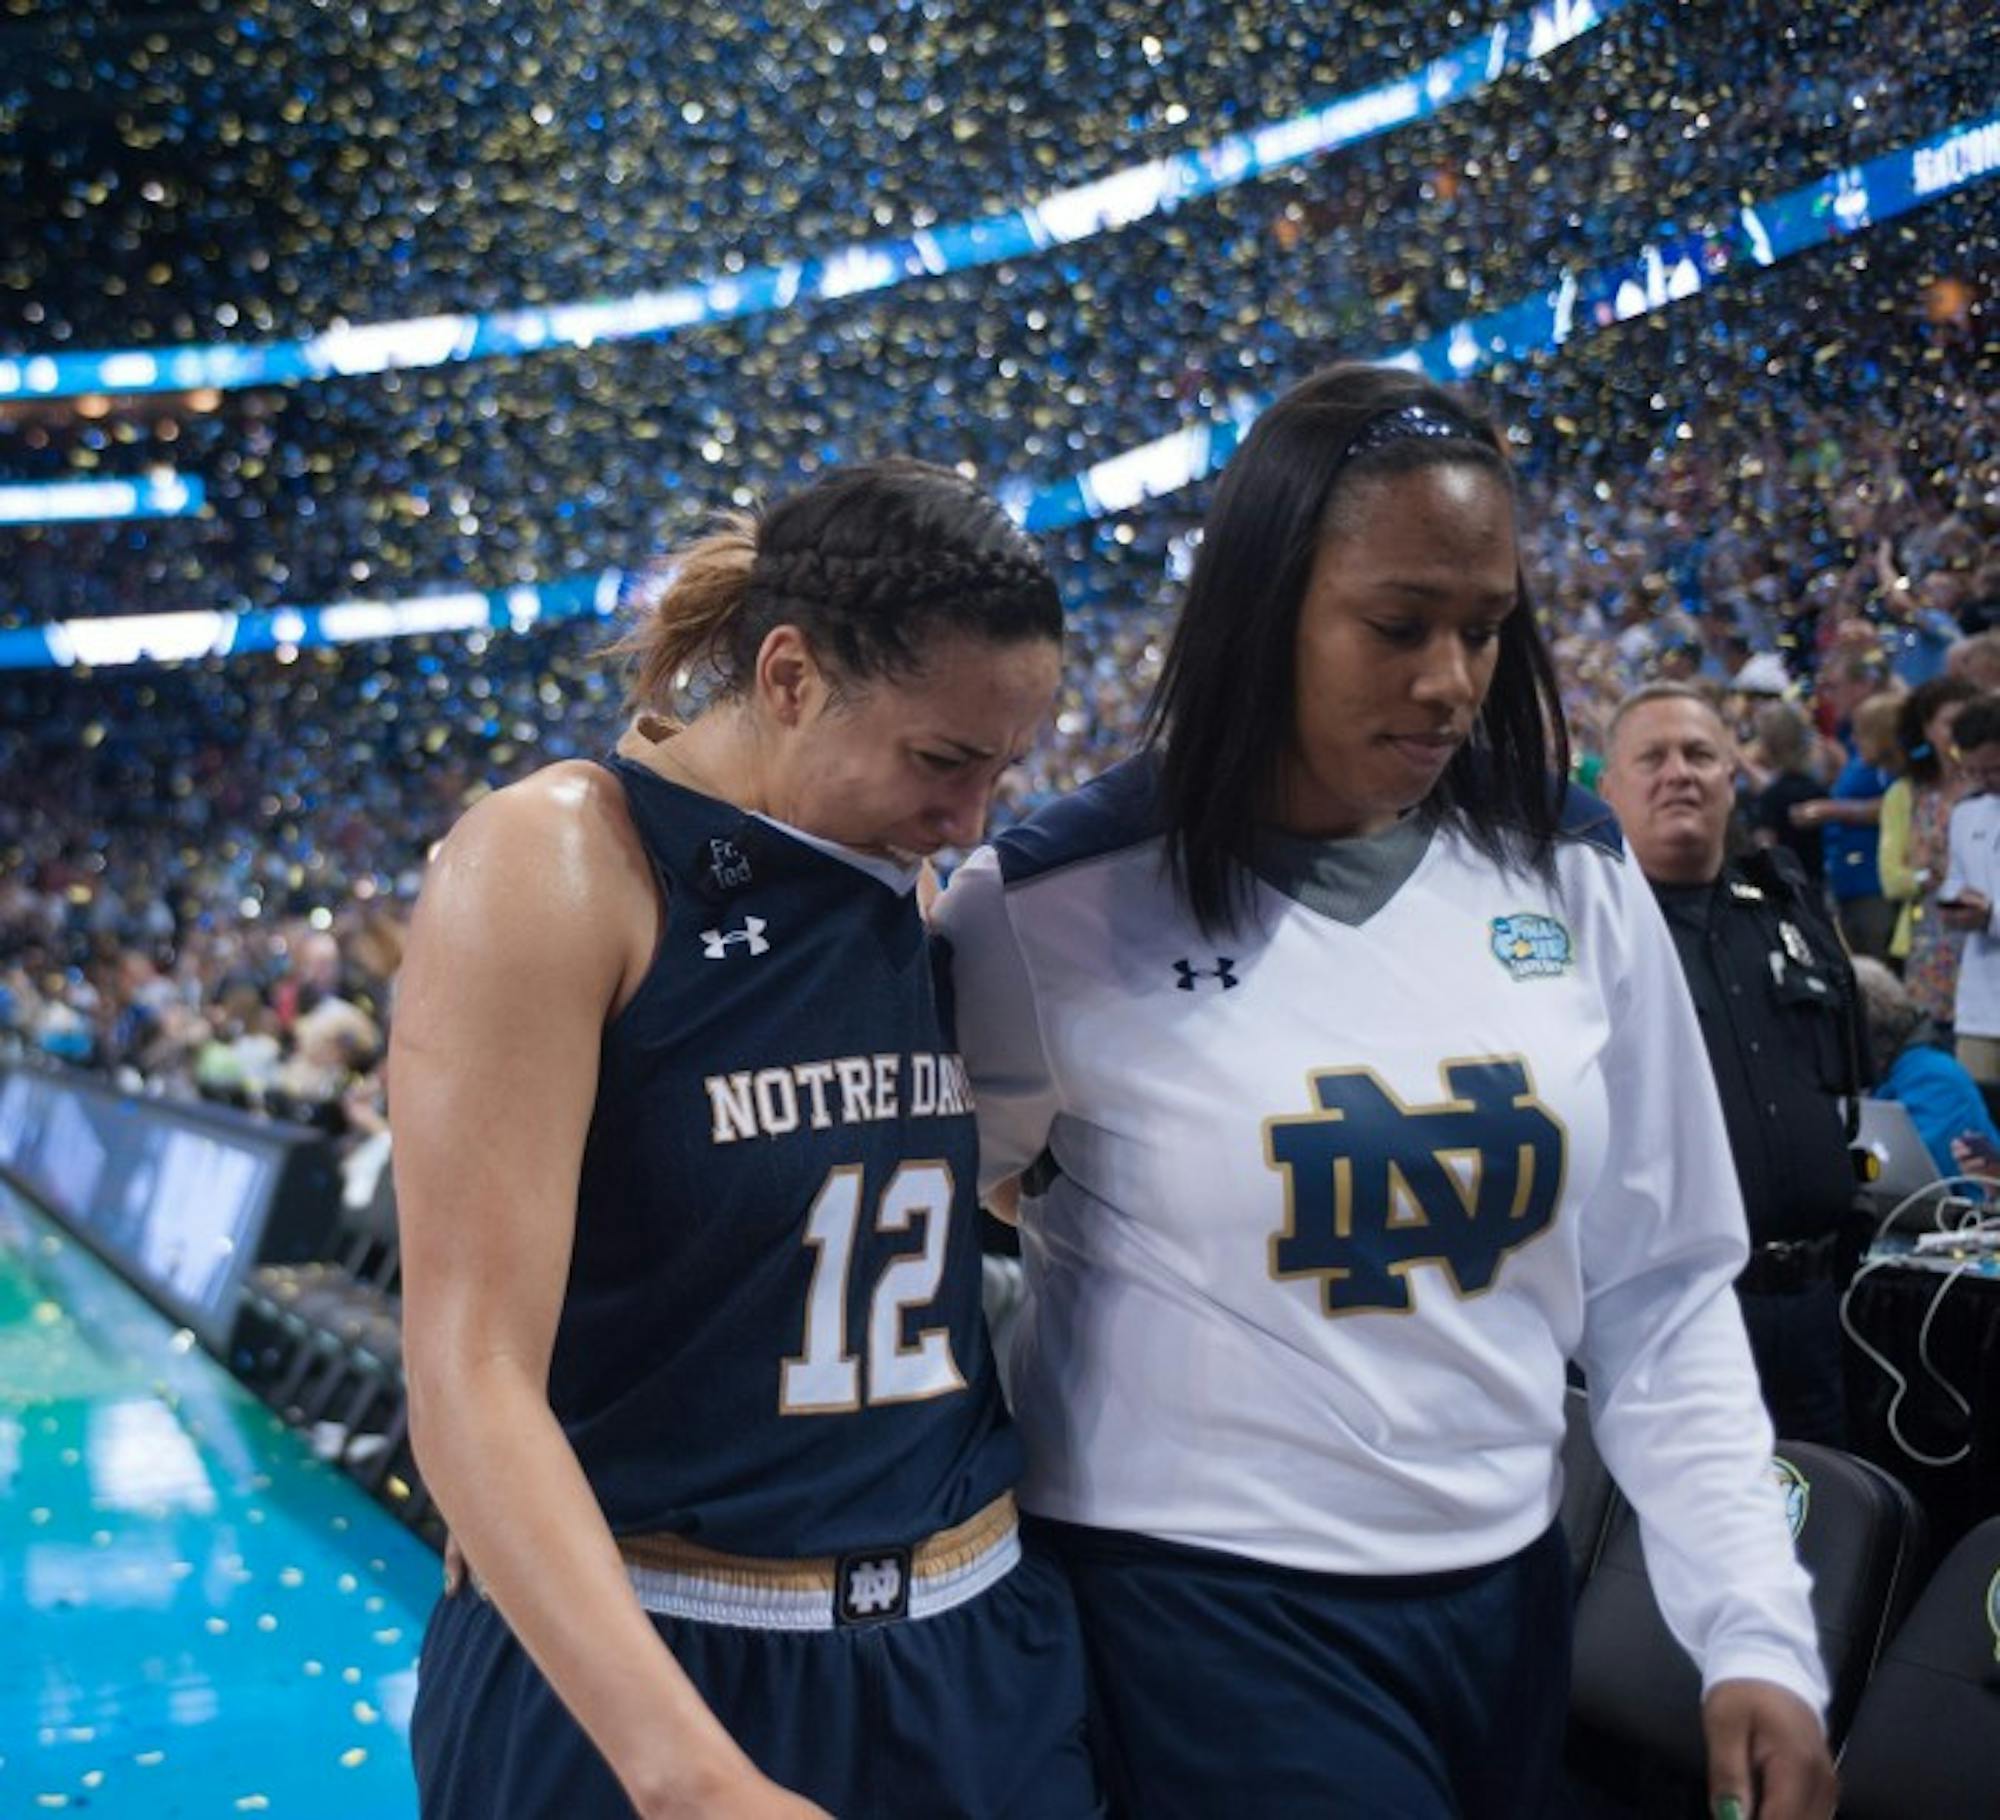 Sophomore forward Taya Reimer (left) walks off the court with sophomore forward Kristina Nelson following the 63-53 defeat of the Irish by Connecticut on Tuesday.